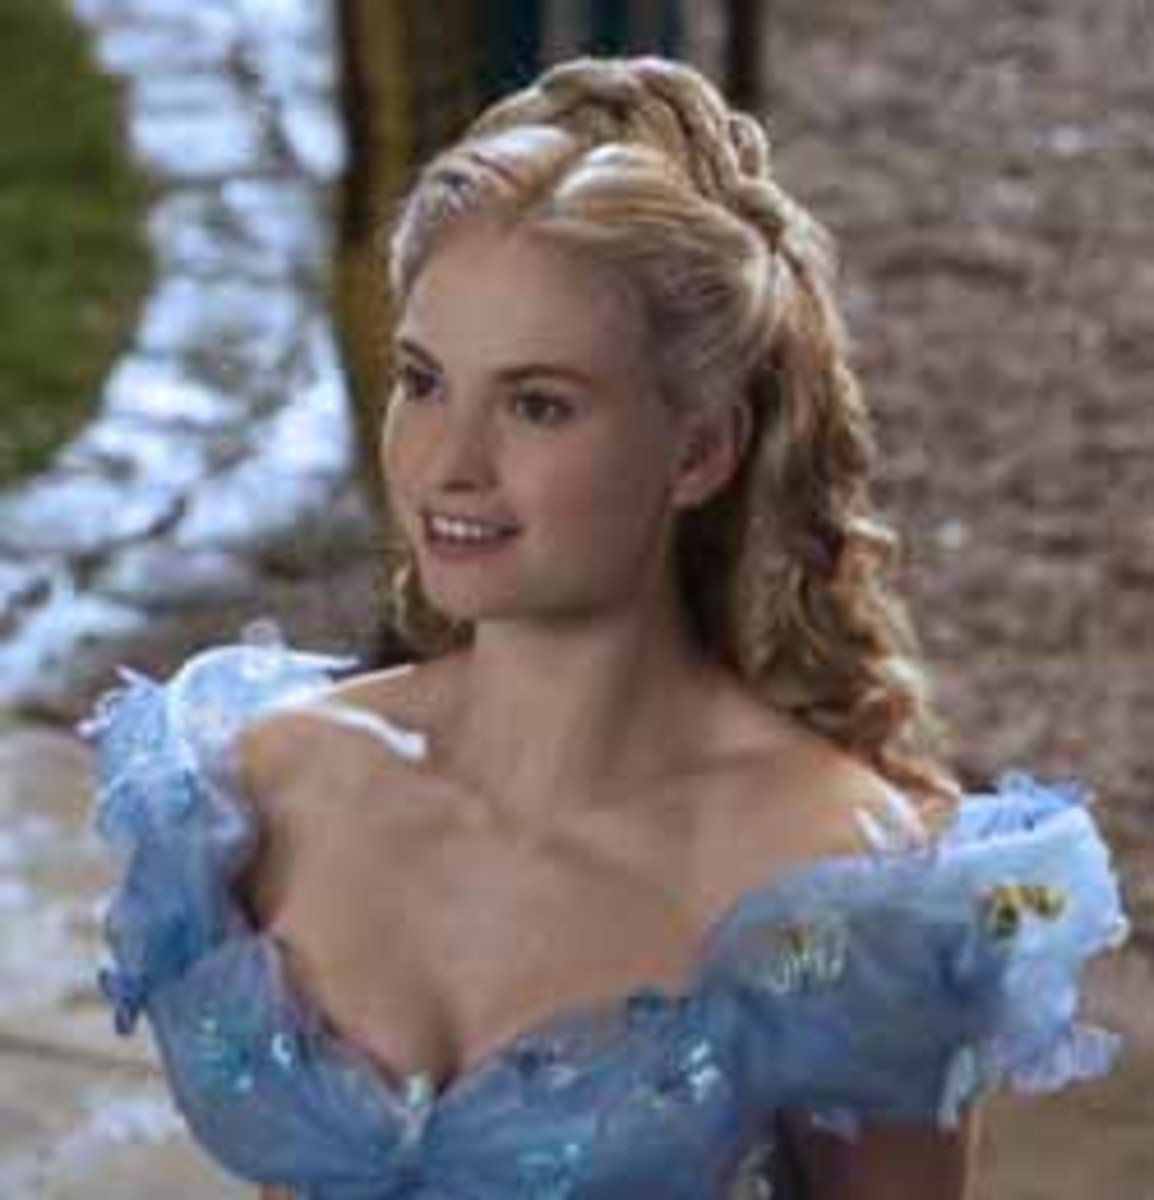 Top 10 Cinderella Gowns from Film